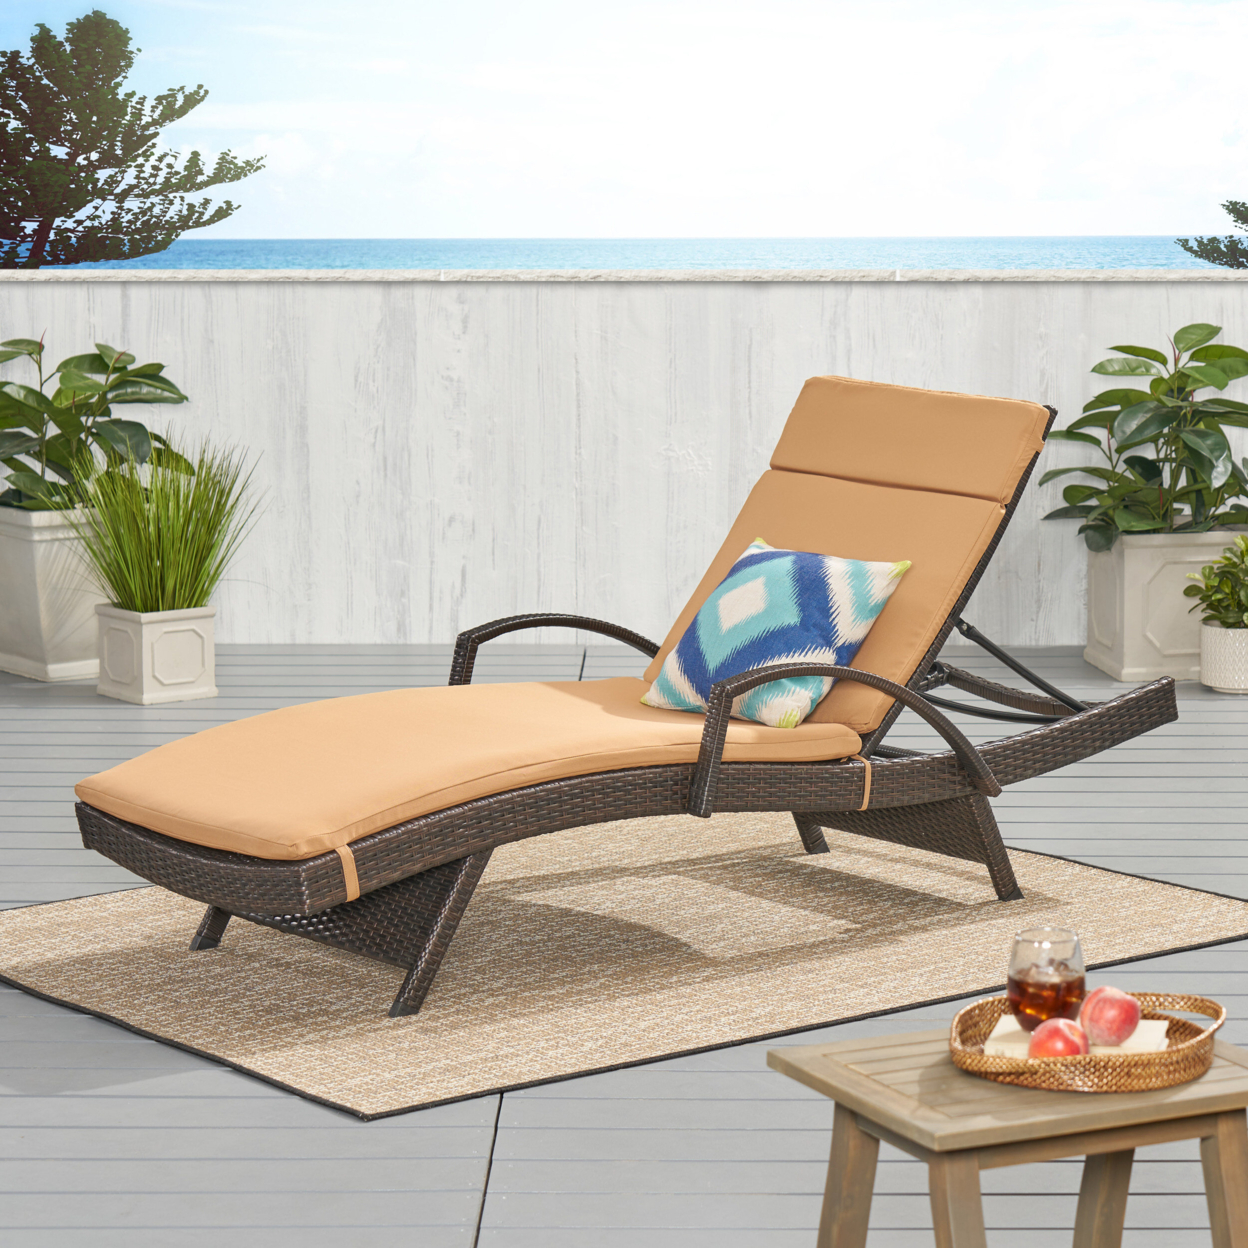 Lakeport Outdoor Adjustable Armed Chaise Lounge Chair With Cushion - Caramel Cushion